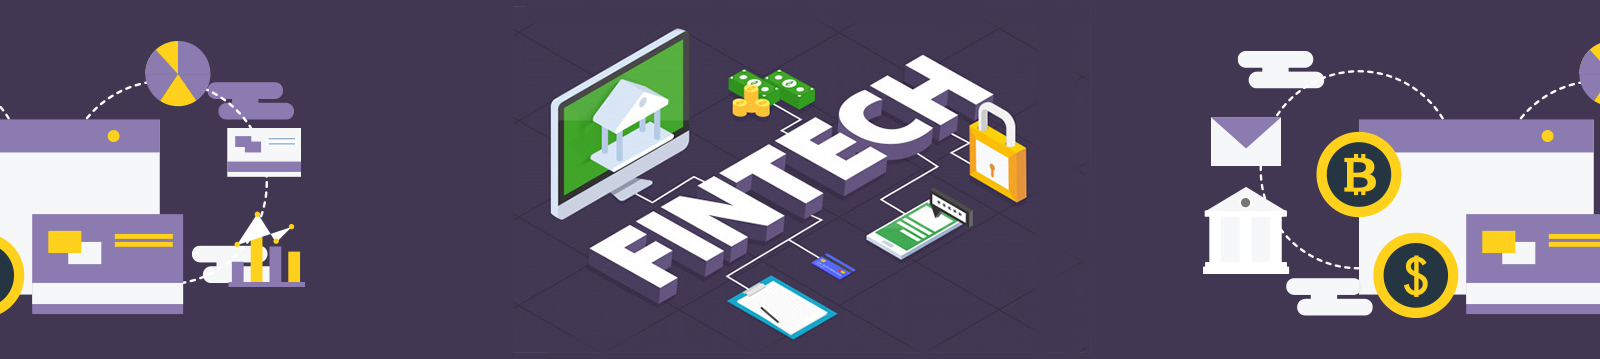 FinTech: What Your Financial Organization Should Focus on Improving